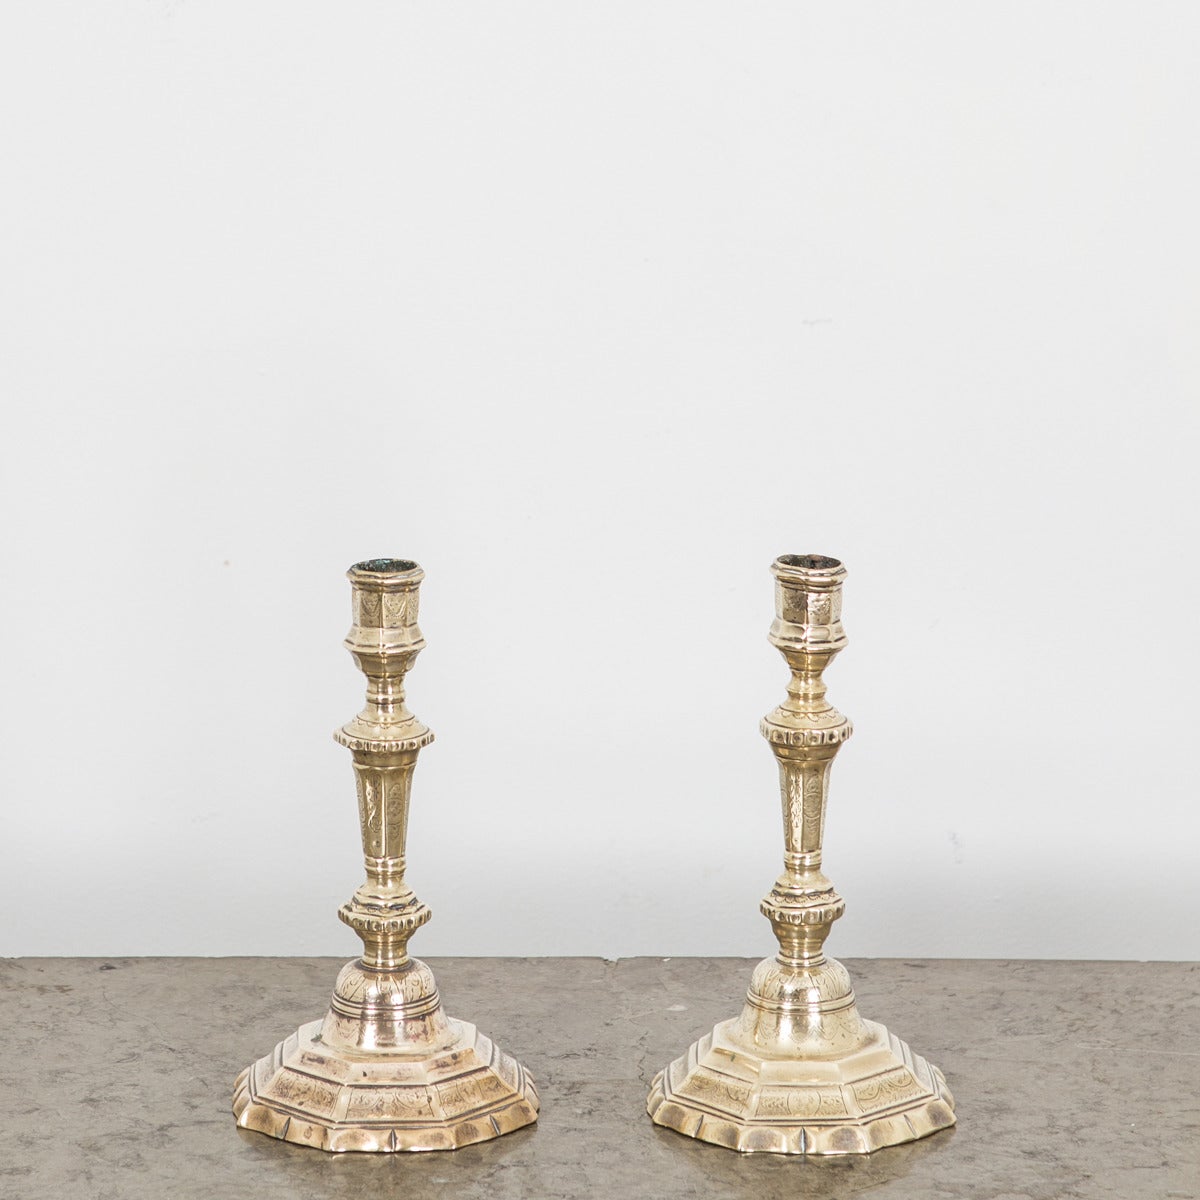 A pair of French Baroque/Louize XIV candlesticks in lovely patinated brass. Decorated with flowers and swags. Octangonal base. All original condition.